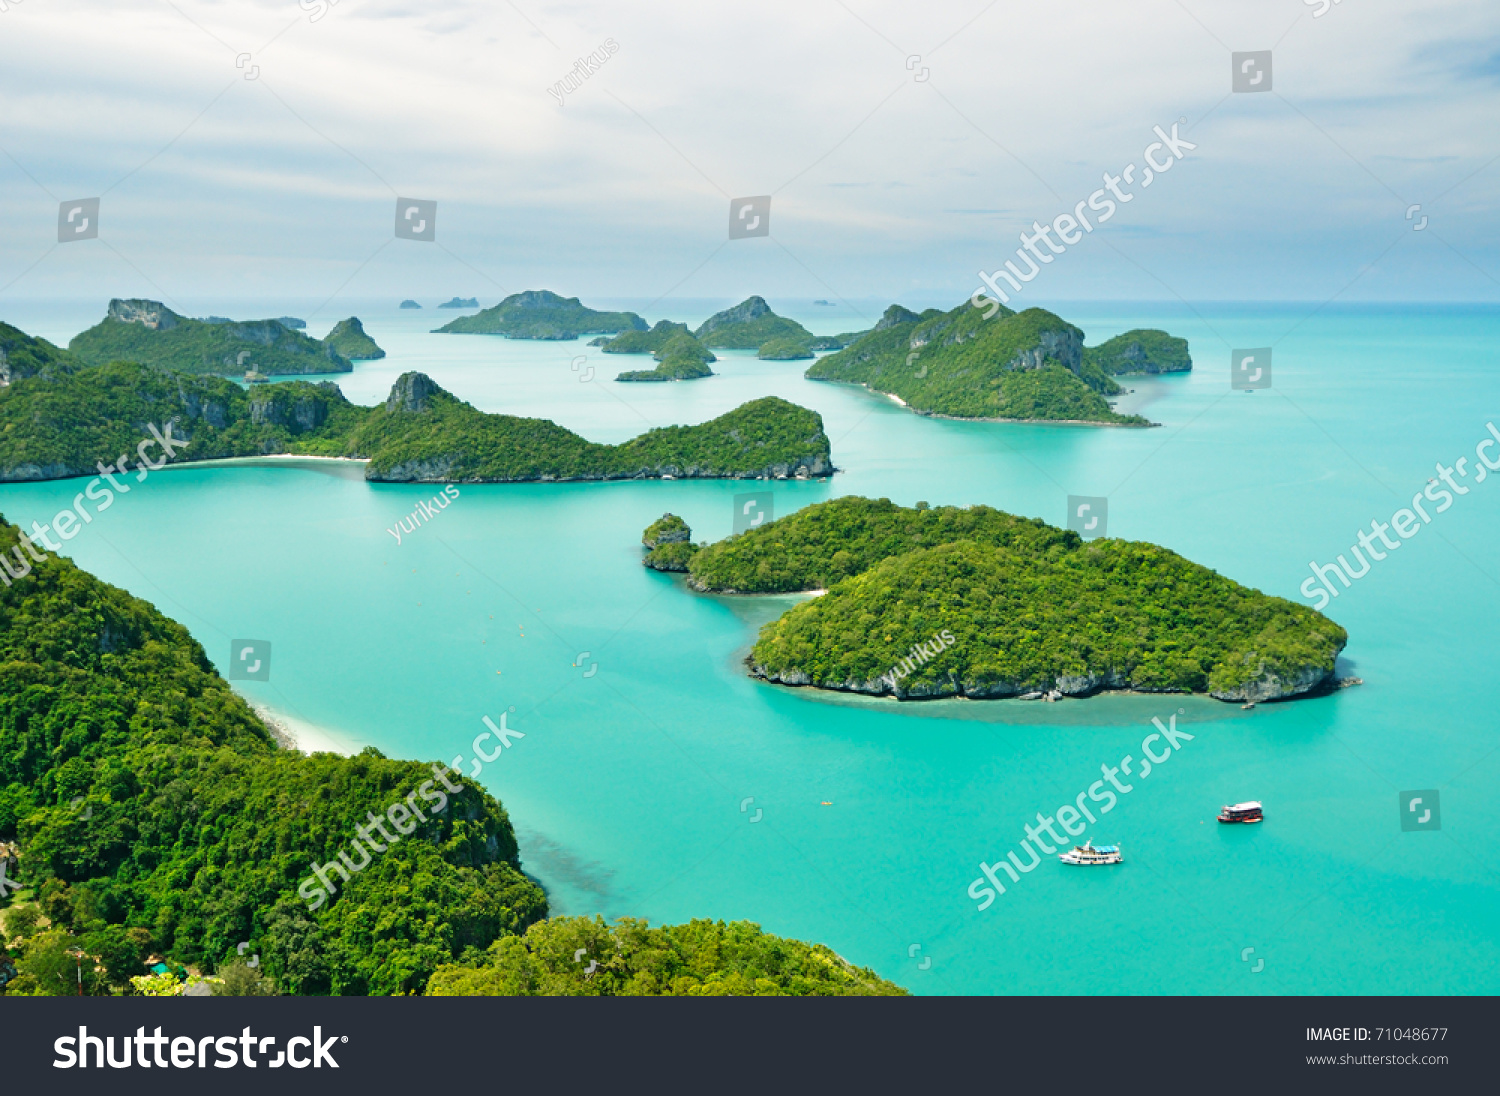 Top view of island group in Thailand #71048677